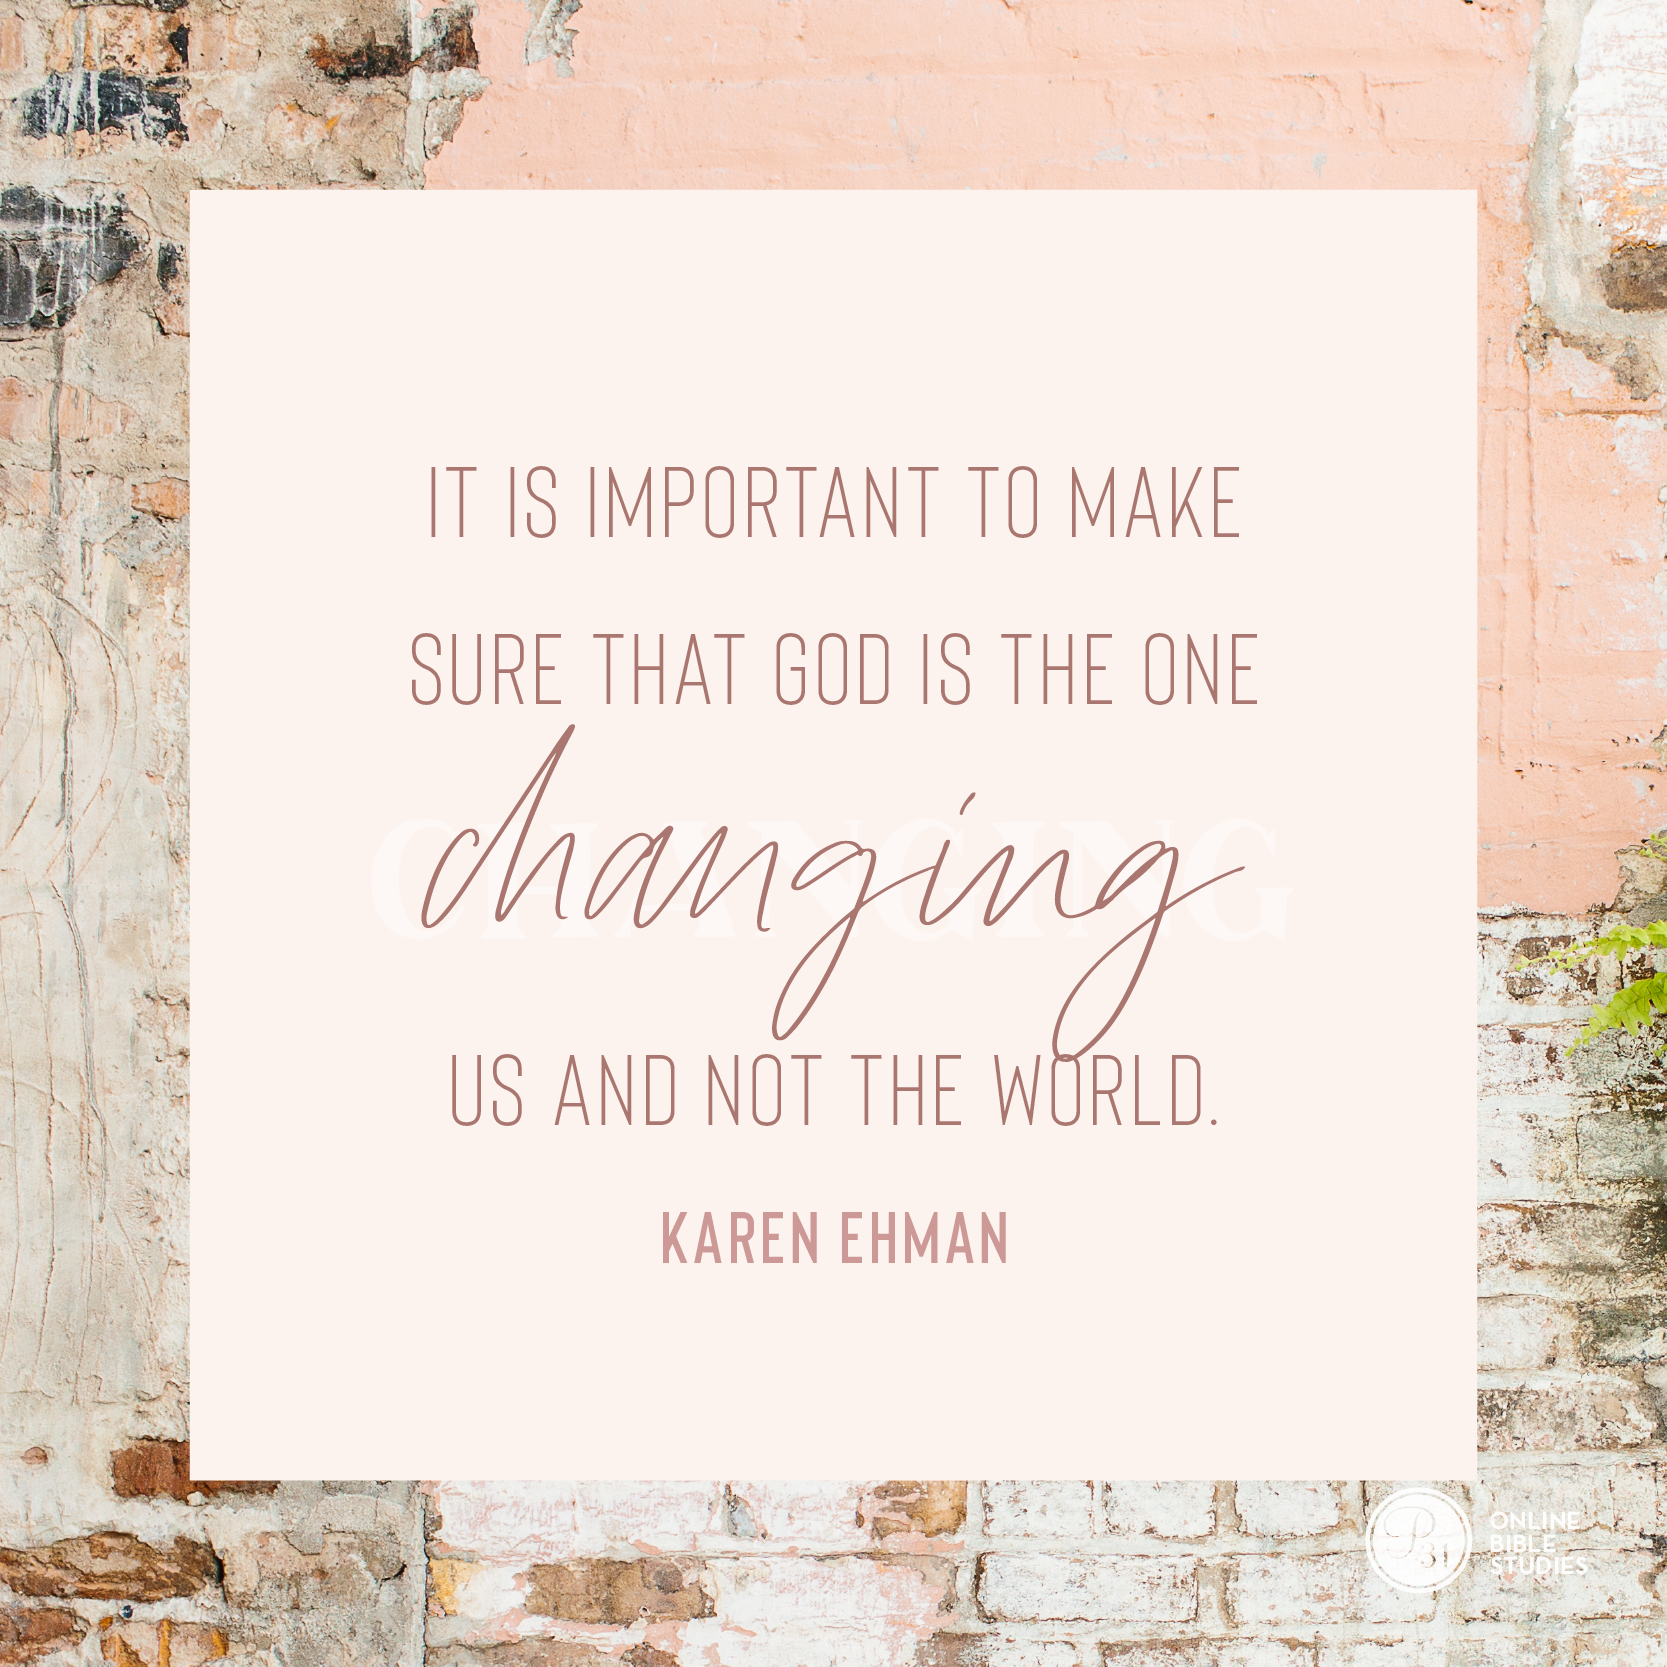 “It’s important to make sure that God is the one changing us and not the world.” - Karen Ehman  #KeepShowingUpBook | Proverbs 31 Online Bible Studies Week 5 #P31OBS